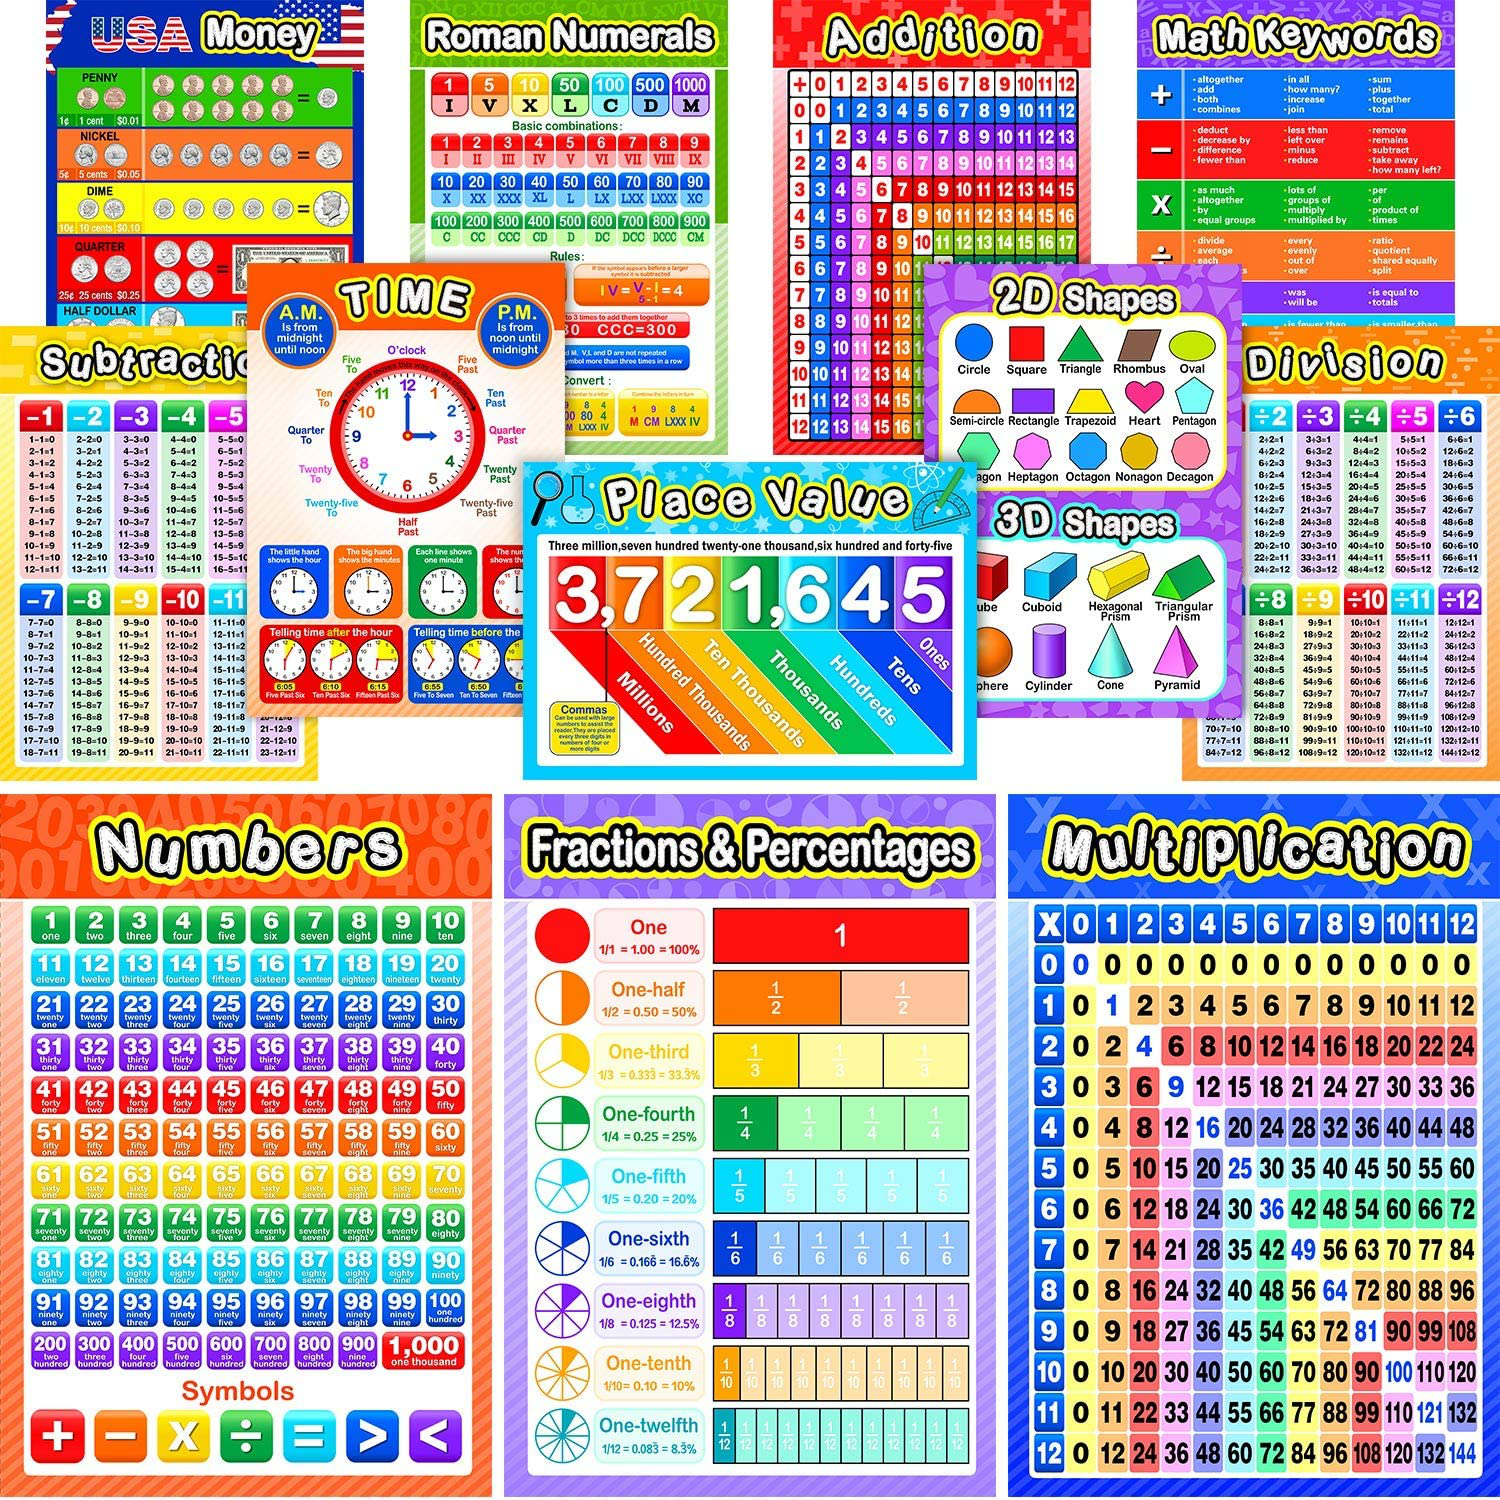 Blulu 12 Pieces Educational Math Posters for Kids with 80 Glue Point Dot for Elementary and Middle School Classroom Teach Multiplication Division Addition Subtraction Fractions Decimals, 16 x 11 Inch